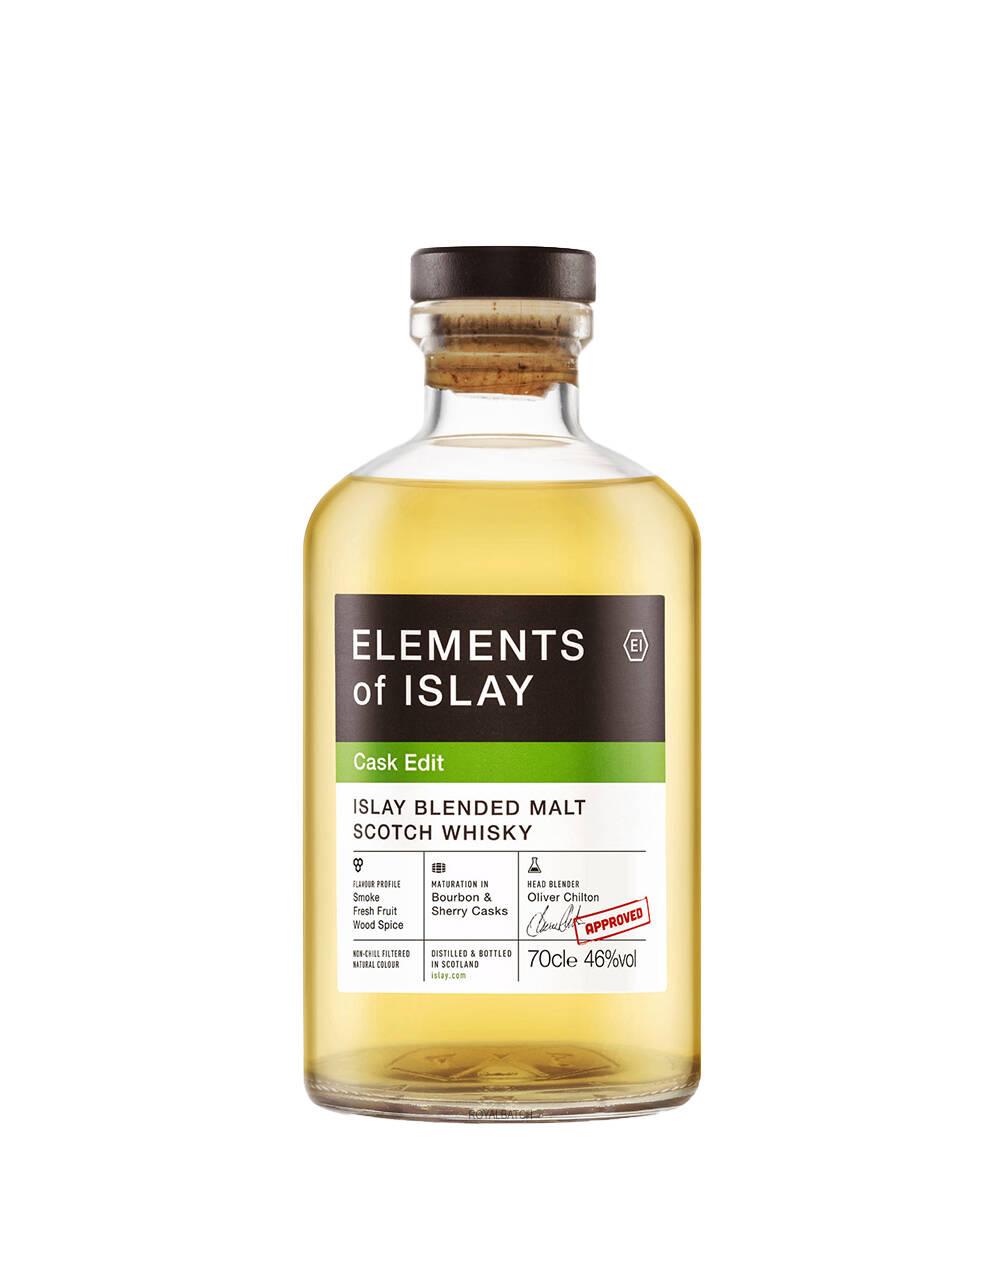 Elements of Islay Cask Edit Scotch Whisky